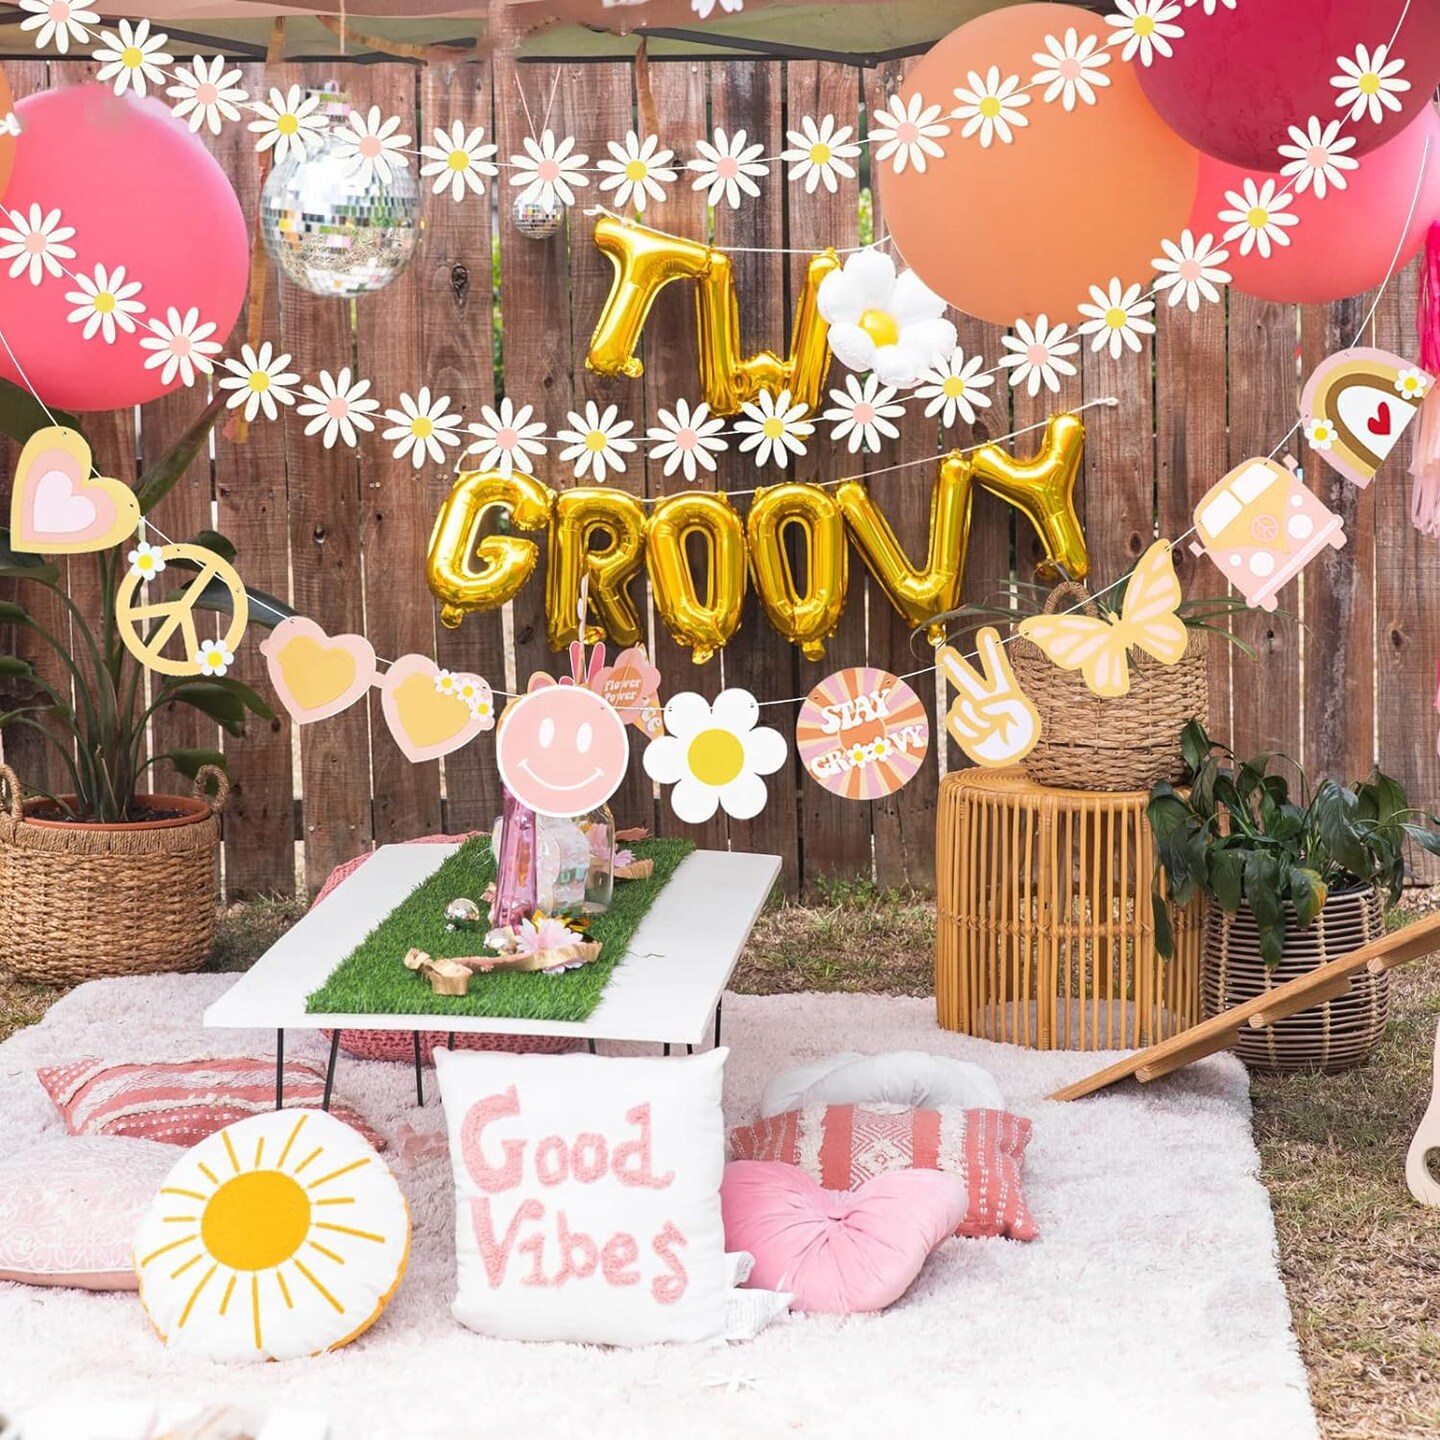 Groovy Party Decoration Garland 5Pcs, Groovy Hippie Banner Daisy Boho Tassel Garland Decor, Pre Strung Pom Pom Spring Party Supplies Hippie Party Decorations for Wall Window Home Room